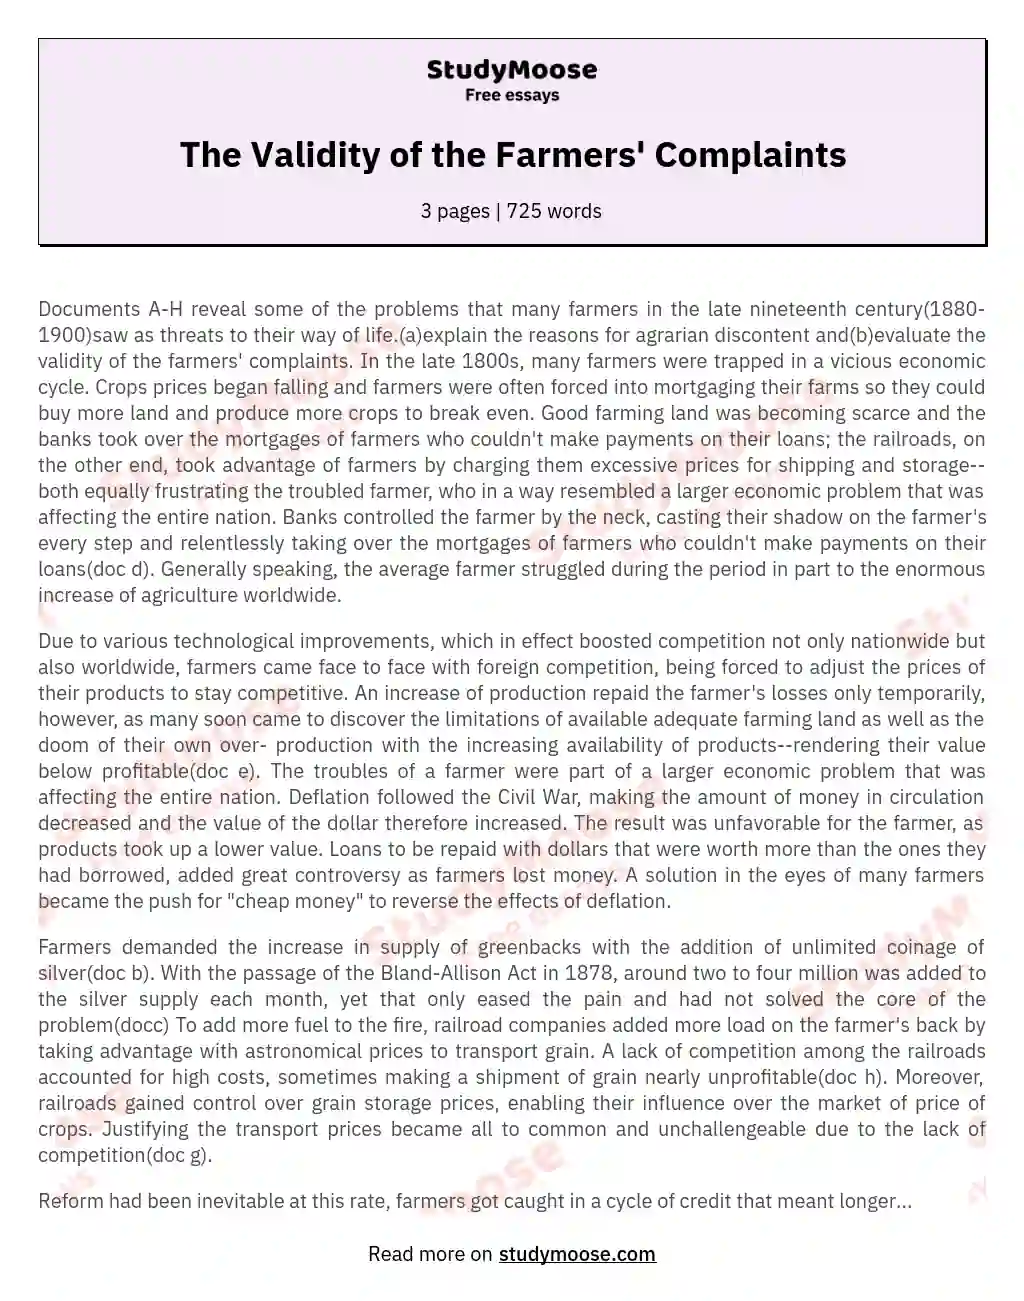 The Validity of the Farmers' Complaints